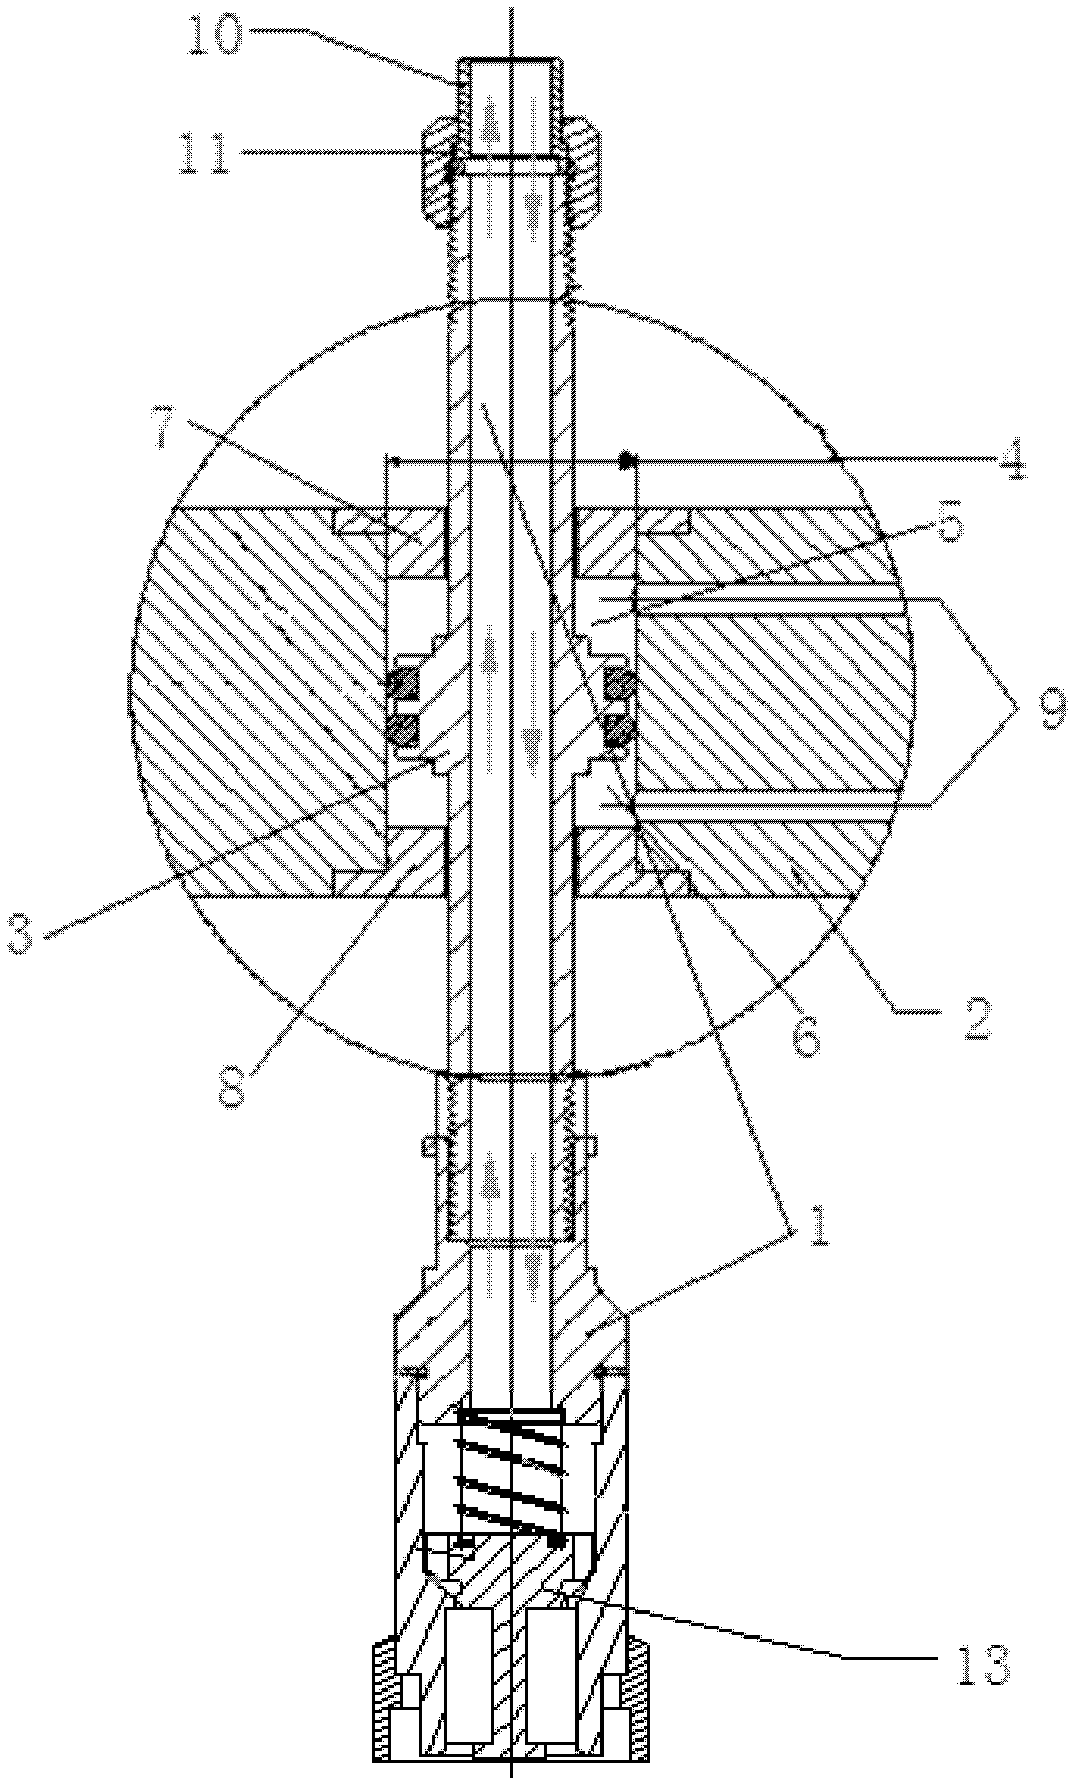 Movable valve hydraulic action system used for continuous adsorption switching equipment